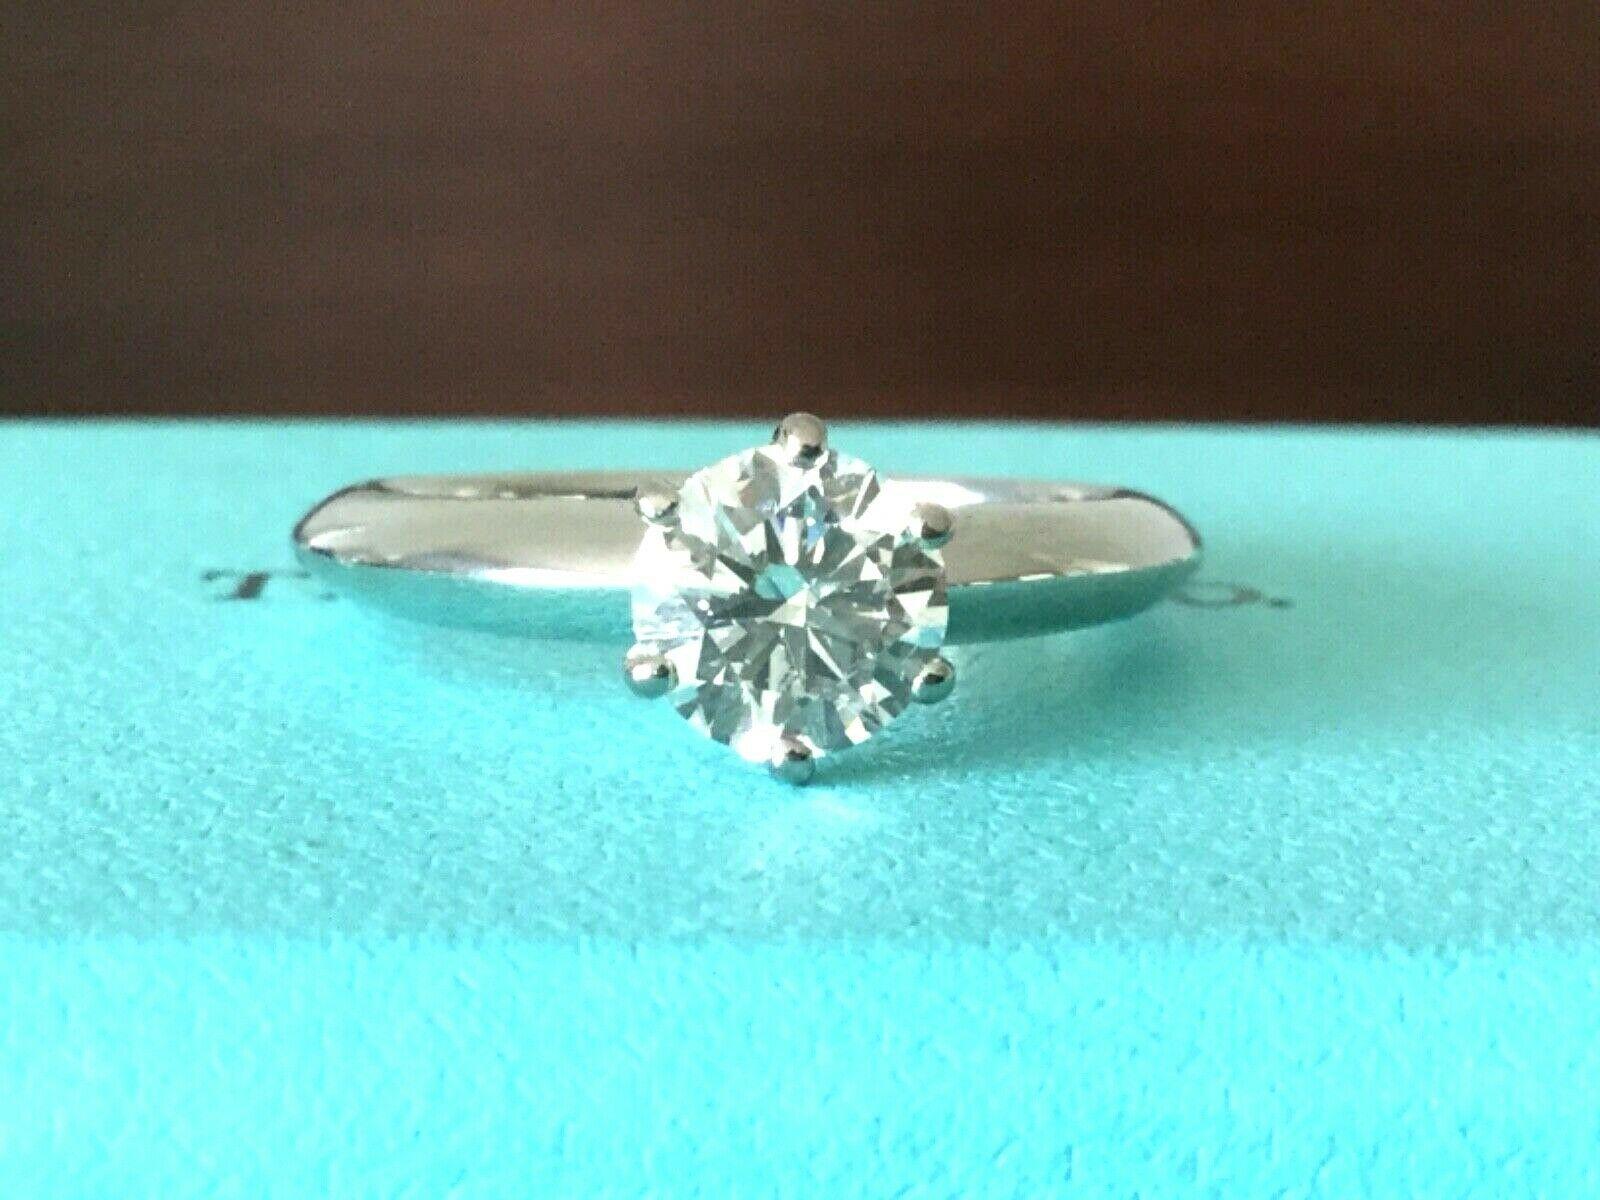 Being offered for your consideration is a stunning Tiffany & Co Platinum and Diamond .80 carat natural round engagement ring set in the classic 6 prong setting.  The ring shows like brand new! 

This ring currently retails at Tiffany's for $9,000